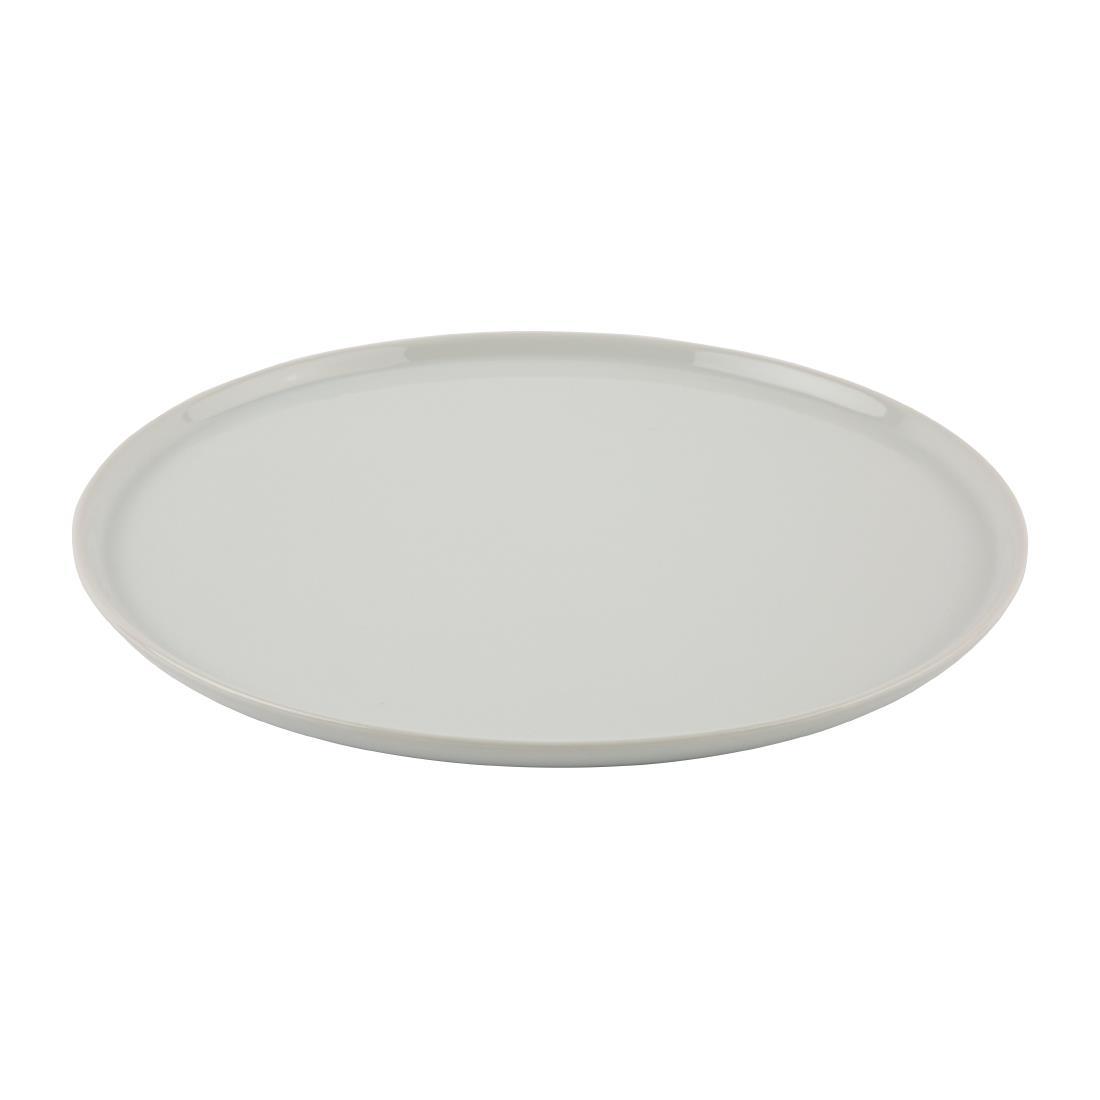 Olympia Whiteware Pizza Plates 330mm (Pack of 4) - CD723  - 5